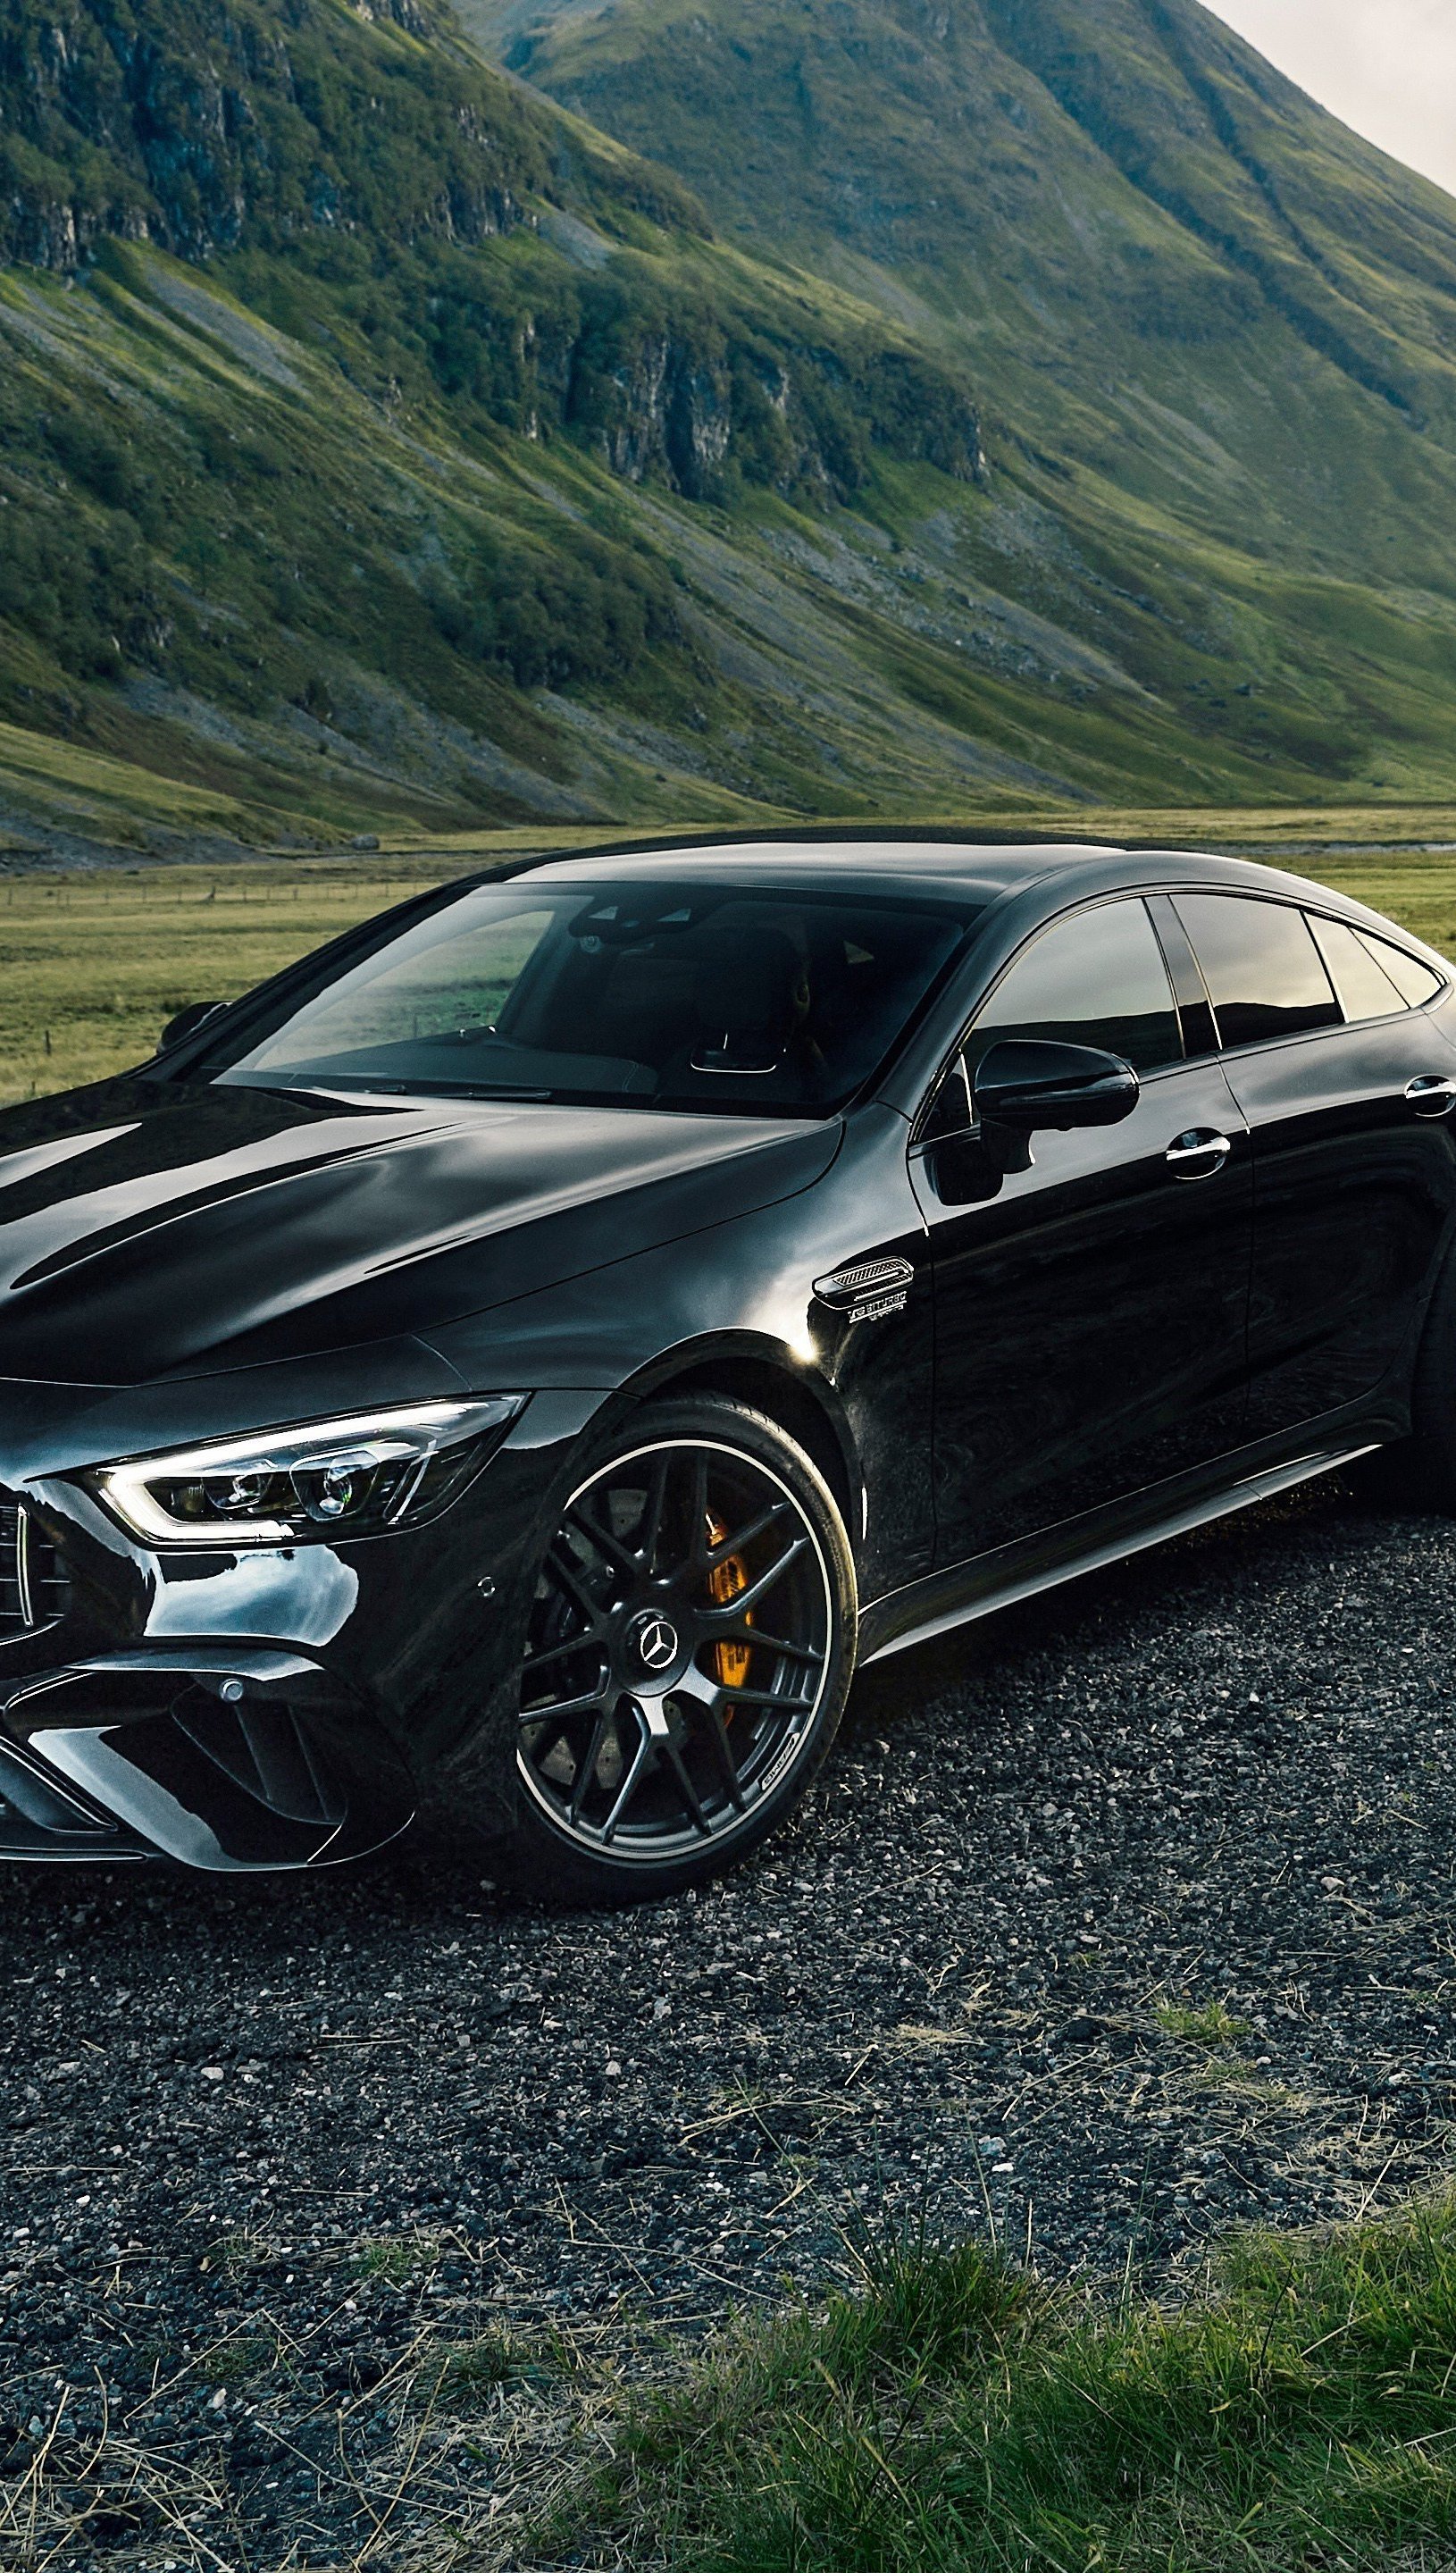 Mercedes AMG C63 S Coupe Edition HD Wallpaper  HD Car Wallpapers 7986